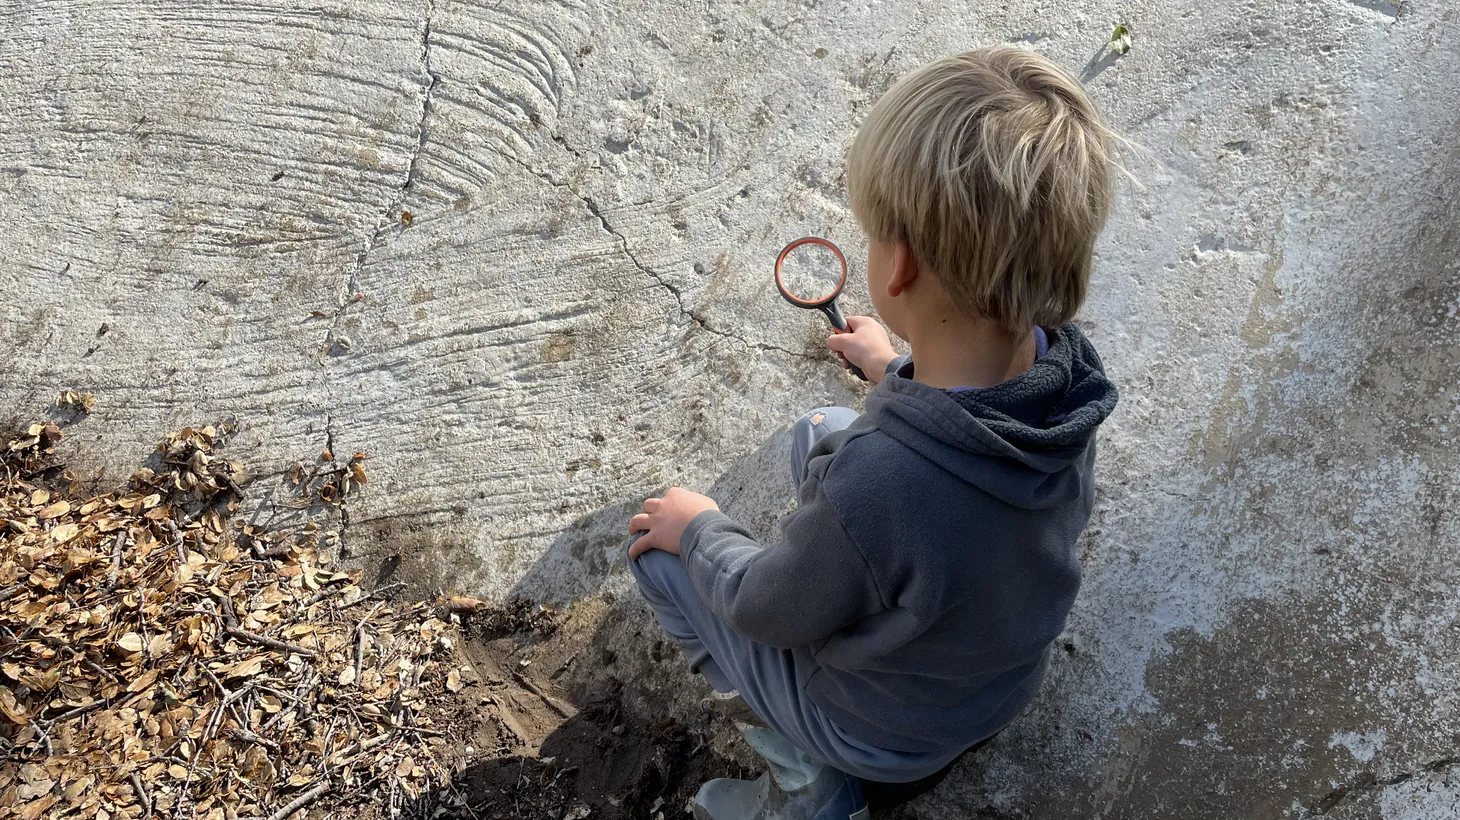 Five-year-old homeschool student Oliver Davis examines insects at a park in Simi Valley as a part of his school day.